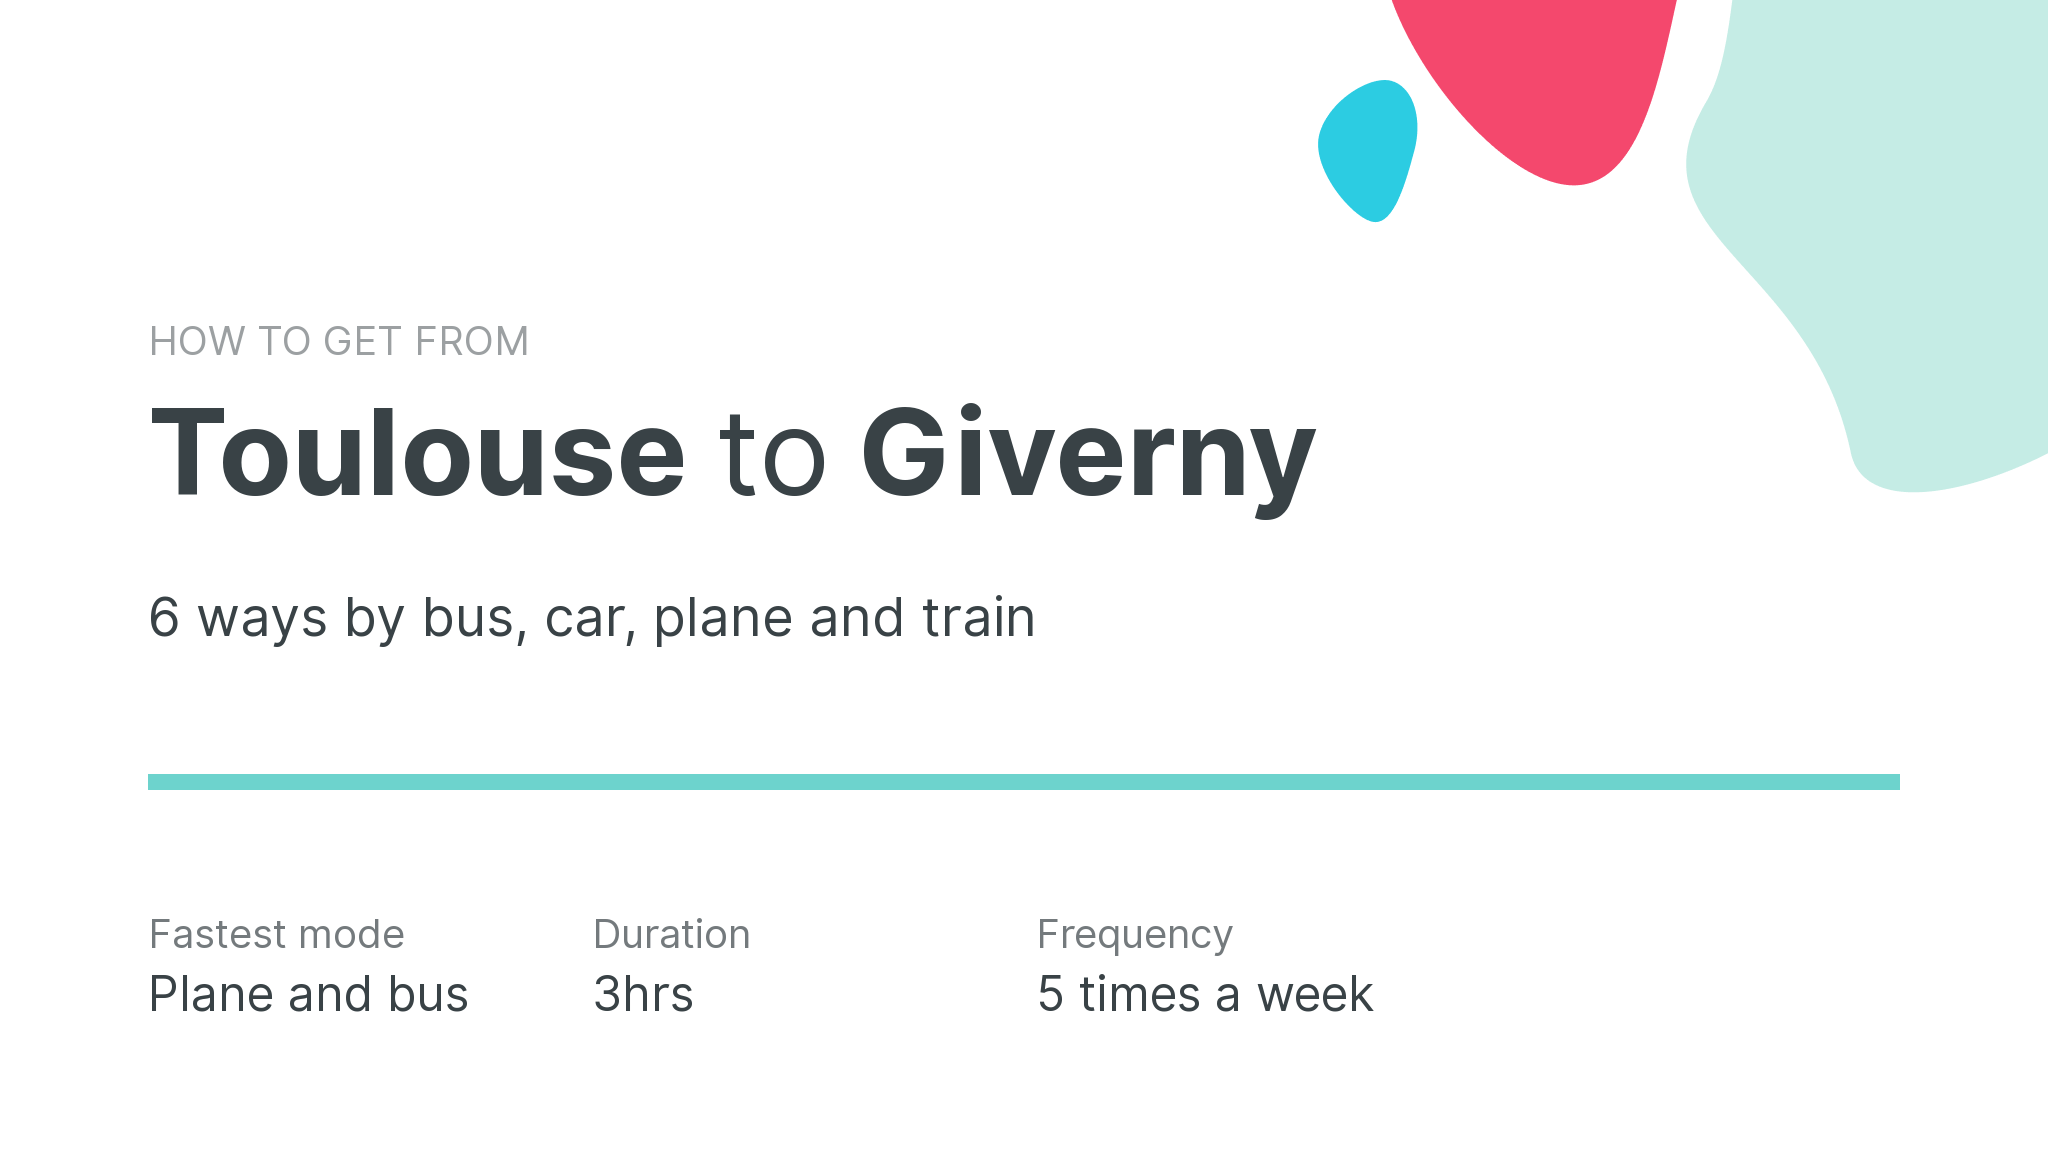 How do I get from Toulouse to Giverny